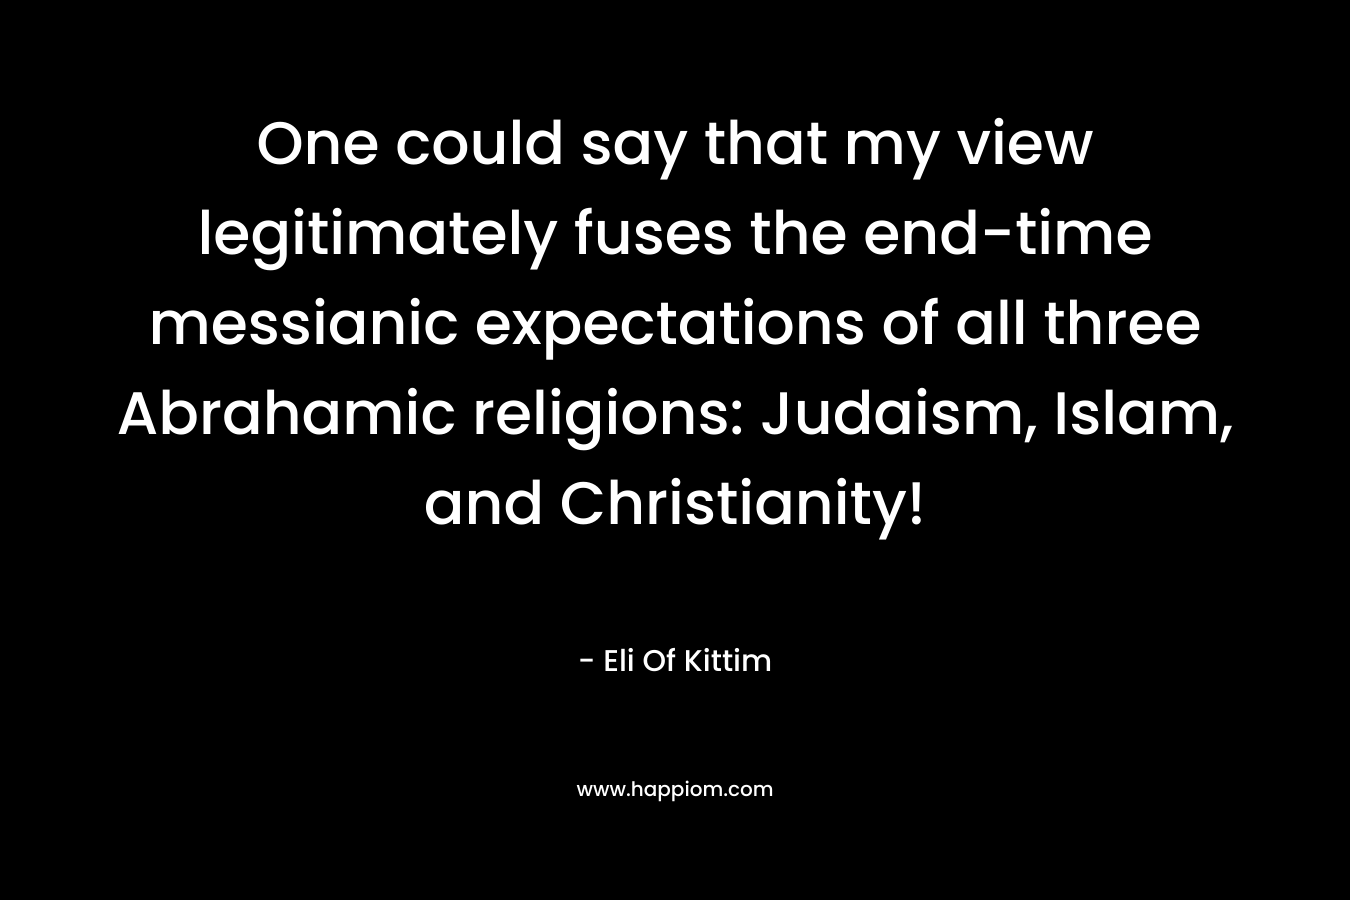 One could say that my view legitimately fuses the end-time messianic expectations of all three Abrahamic religions: Judaism, Islam, and Christianity!